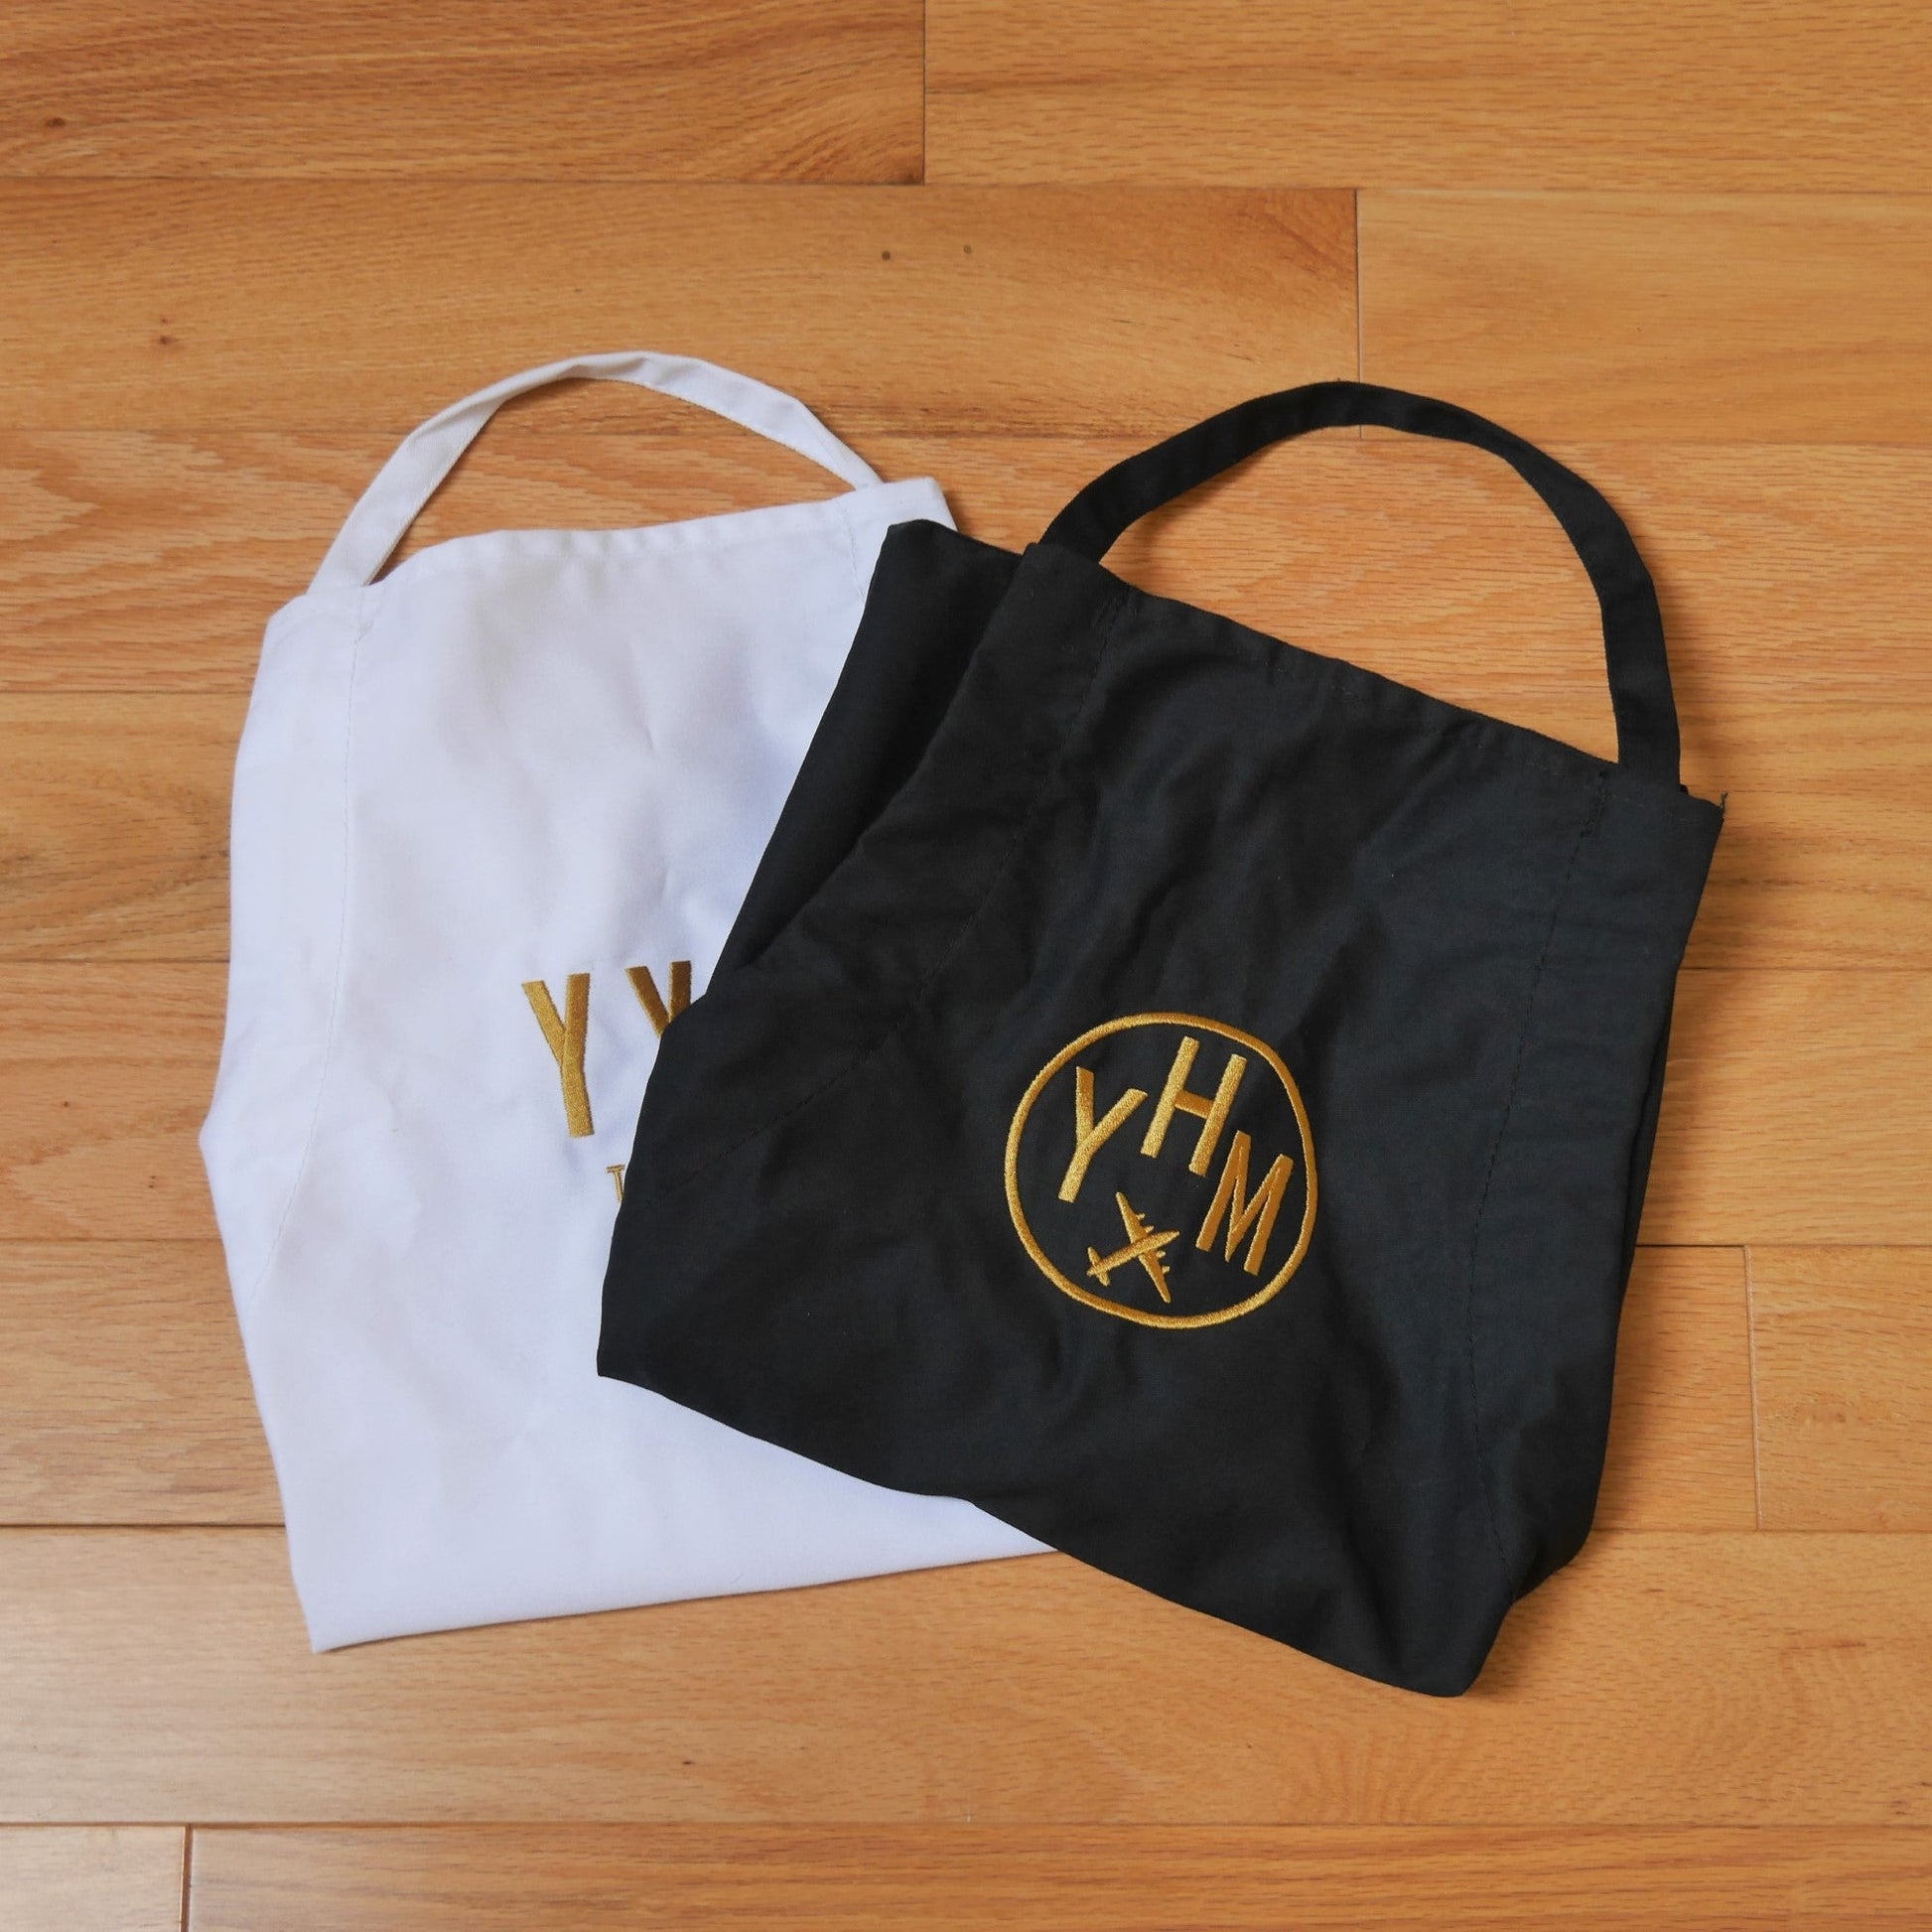 City Embroidered Apron - Old Gold • MEX Mexico City • YHM Designs - Image 14